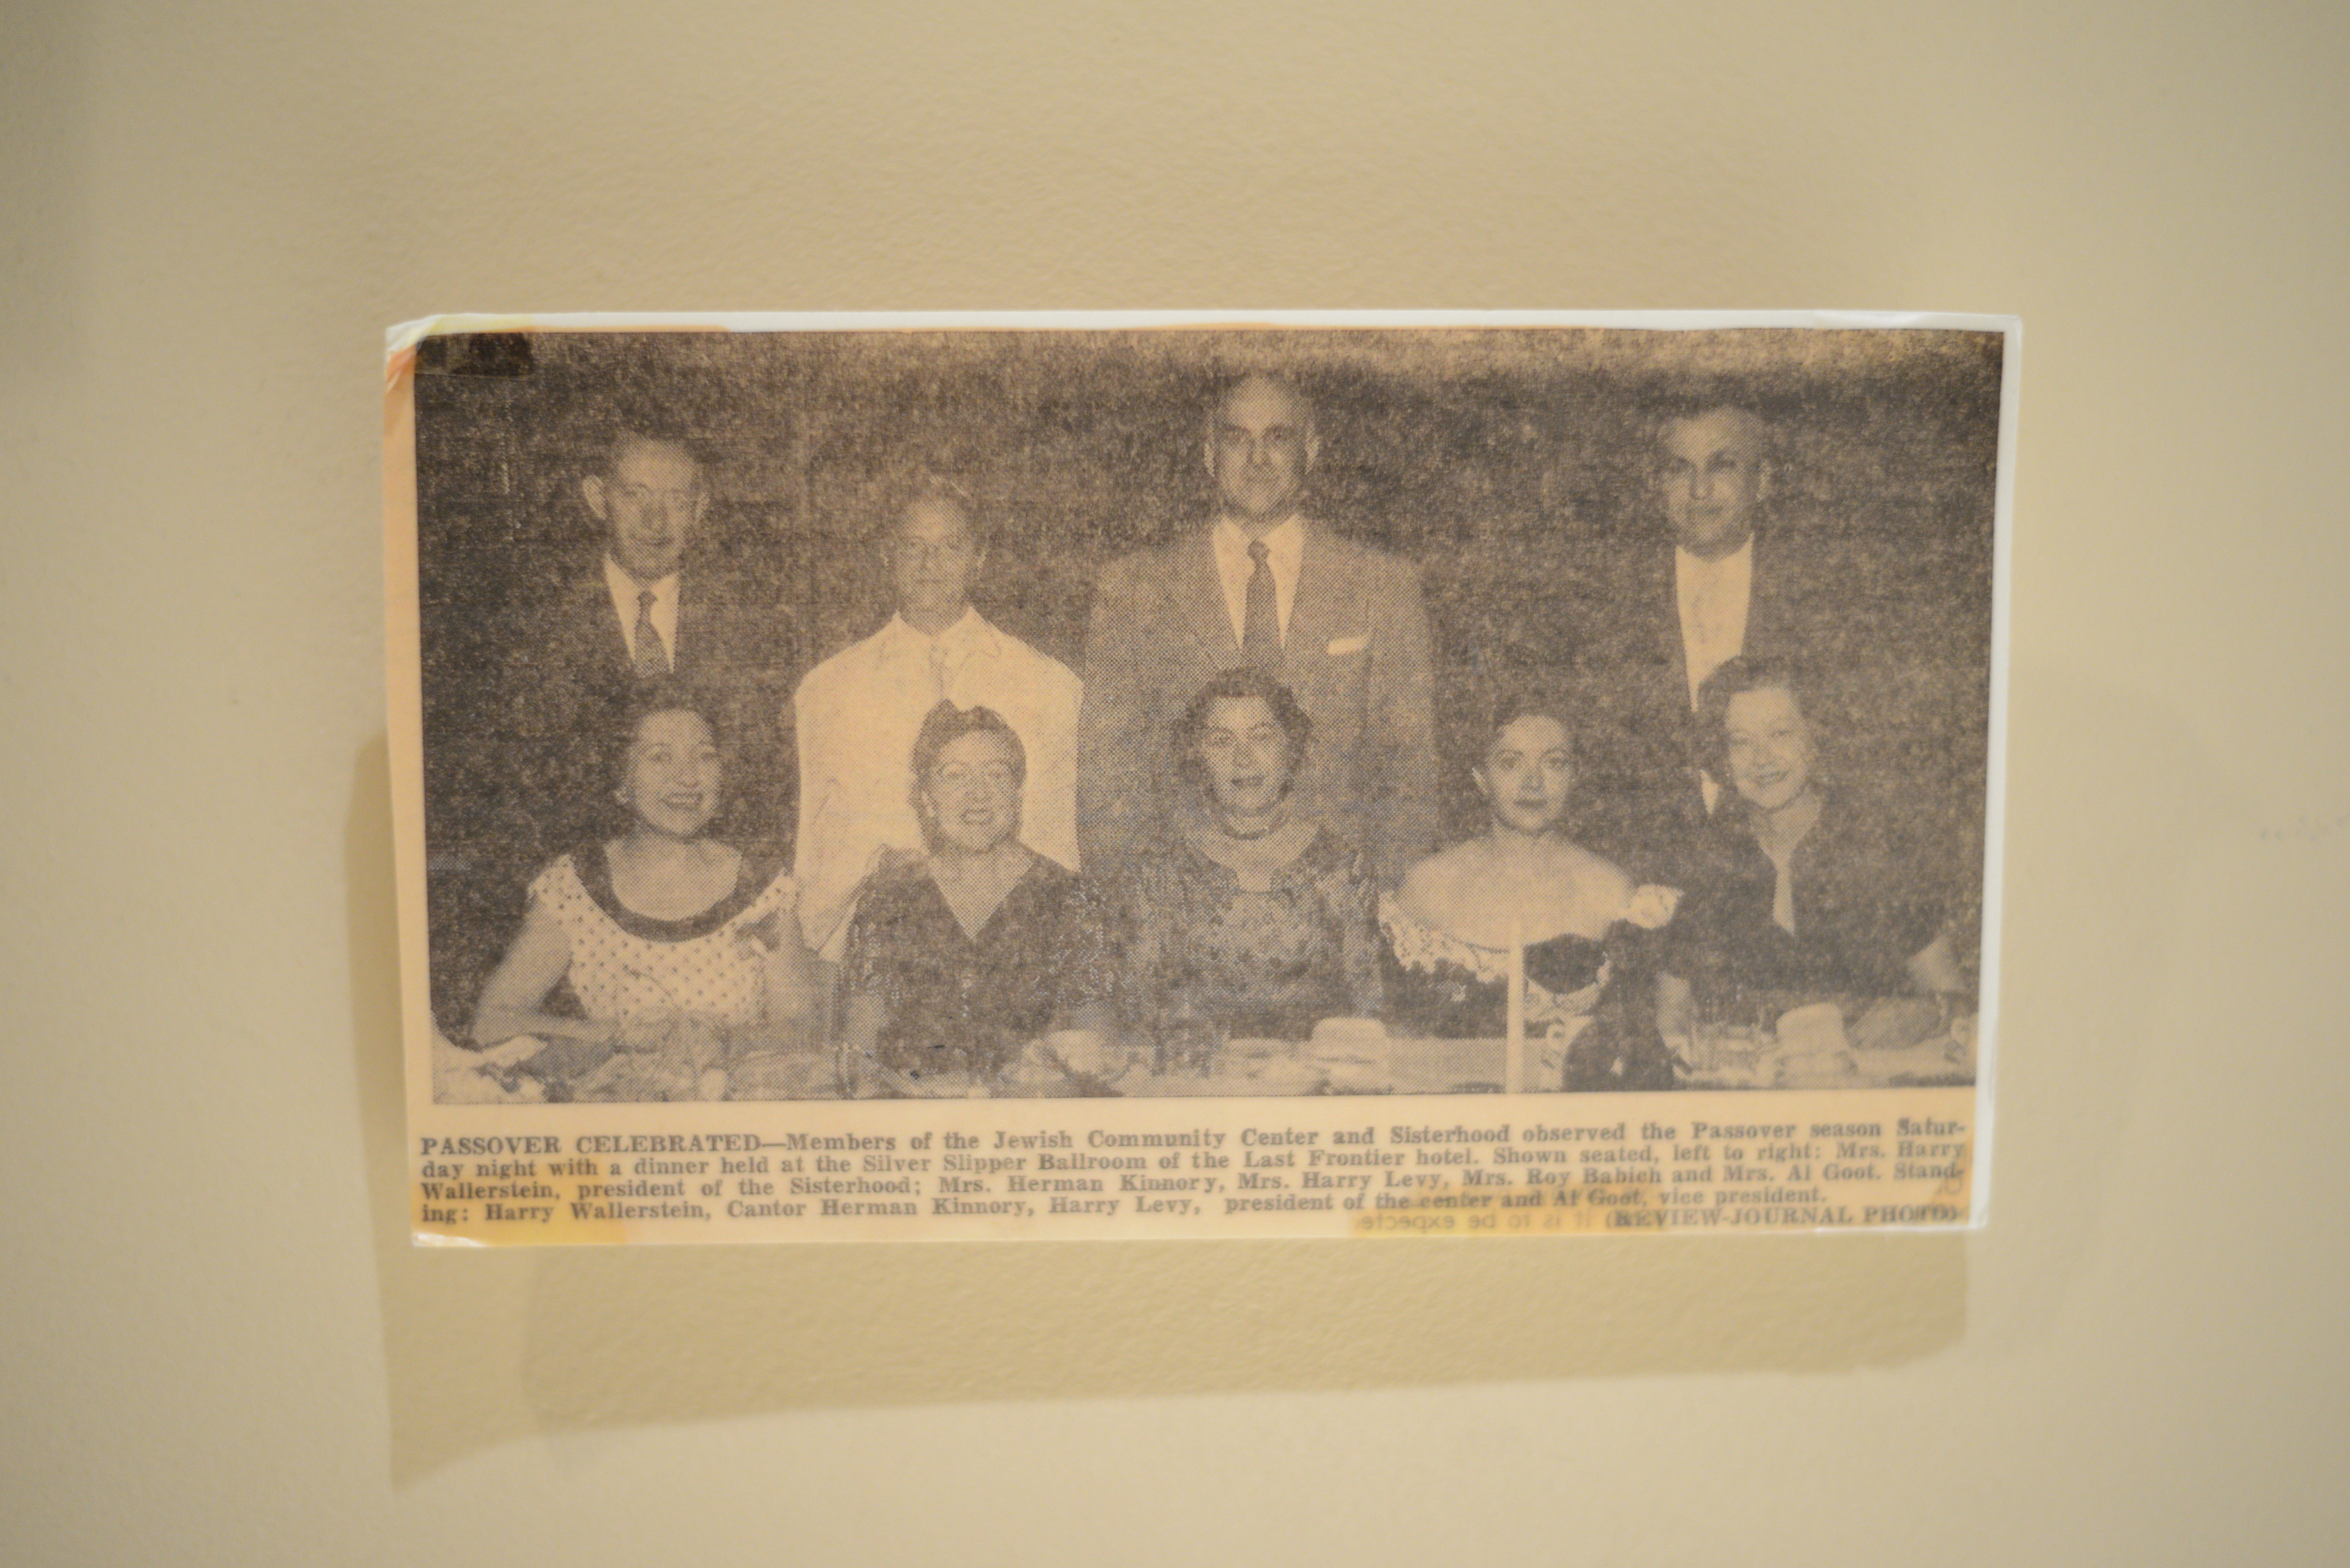 Photograph of newspaper clipping, Passover Celebrated, Las Vegas Review-Journal, date unknown